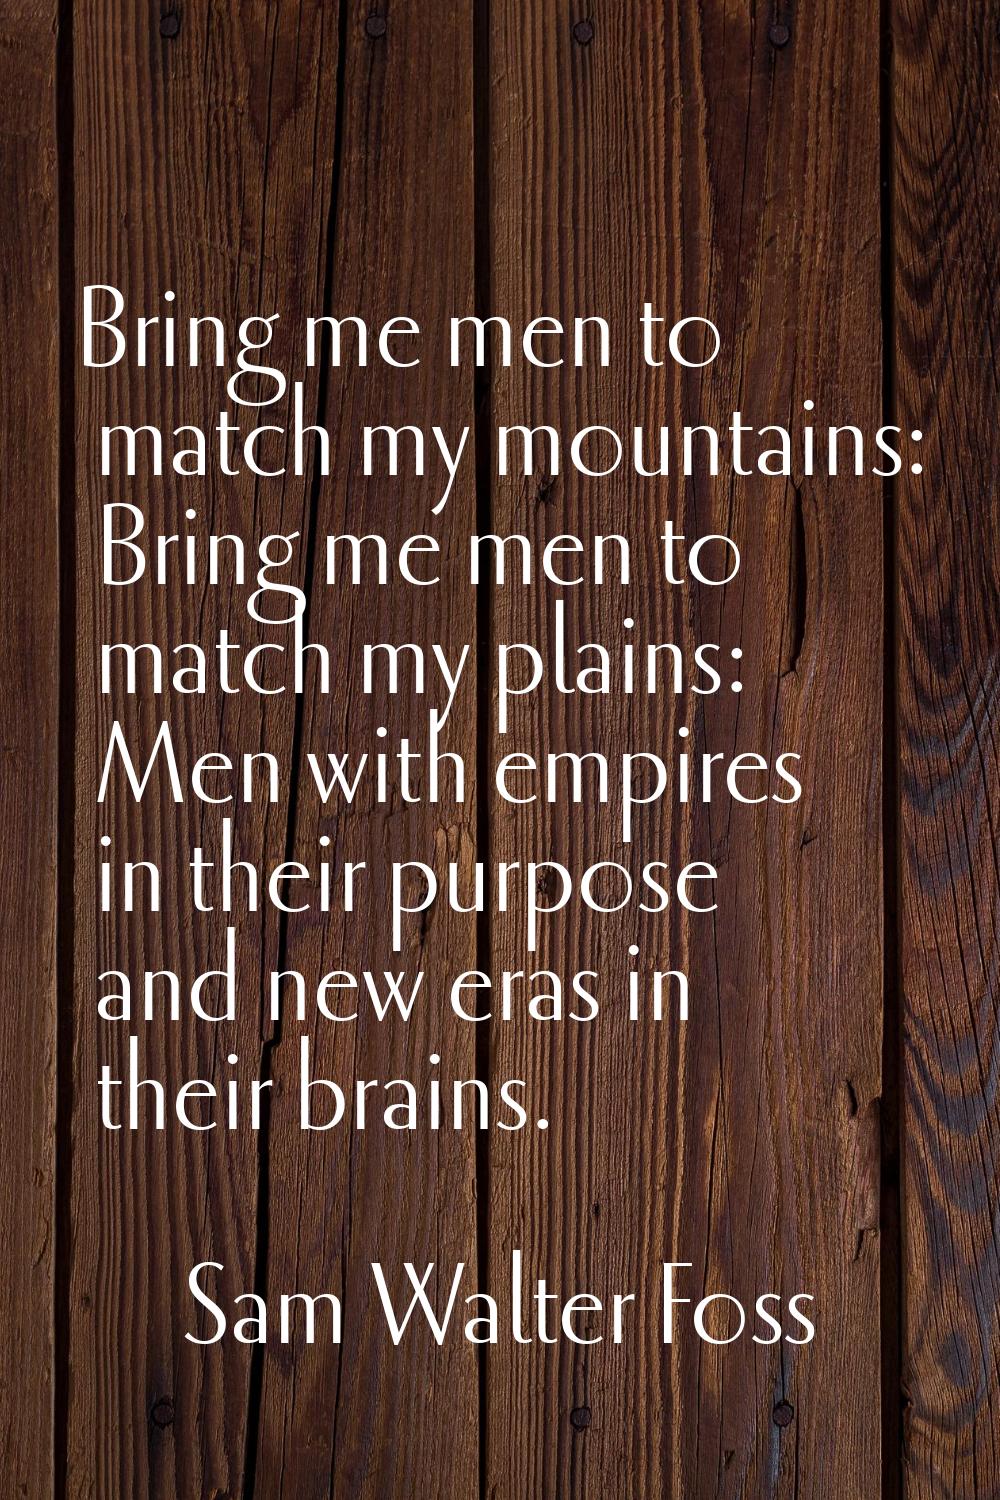 Bring me men to match my mountains: Bring me men to match my plains: Men with empires in their purp